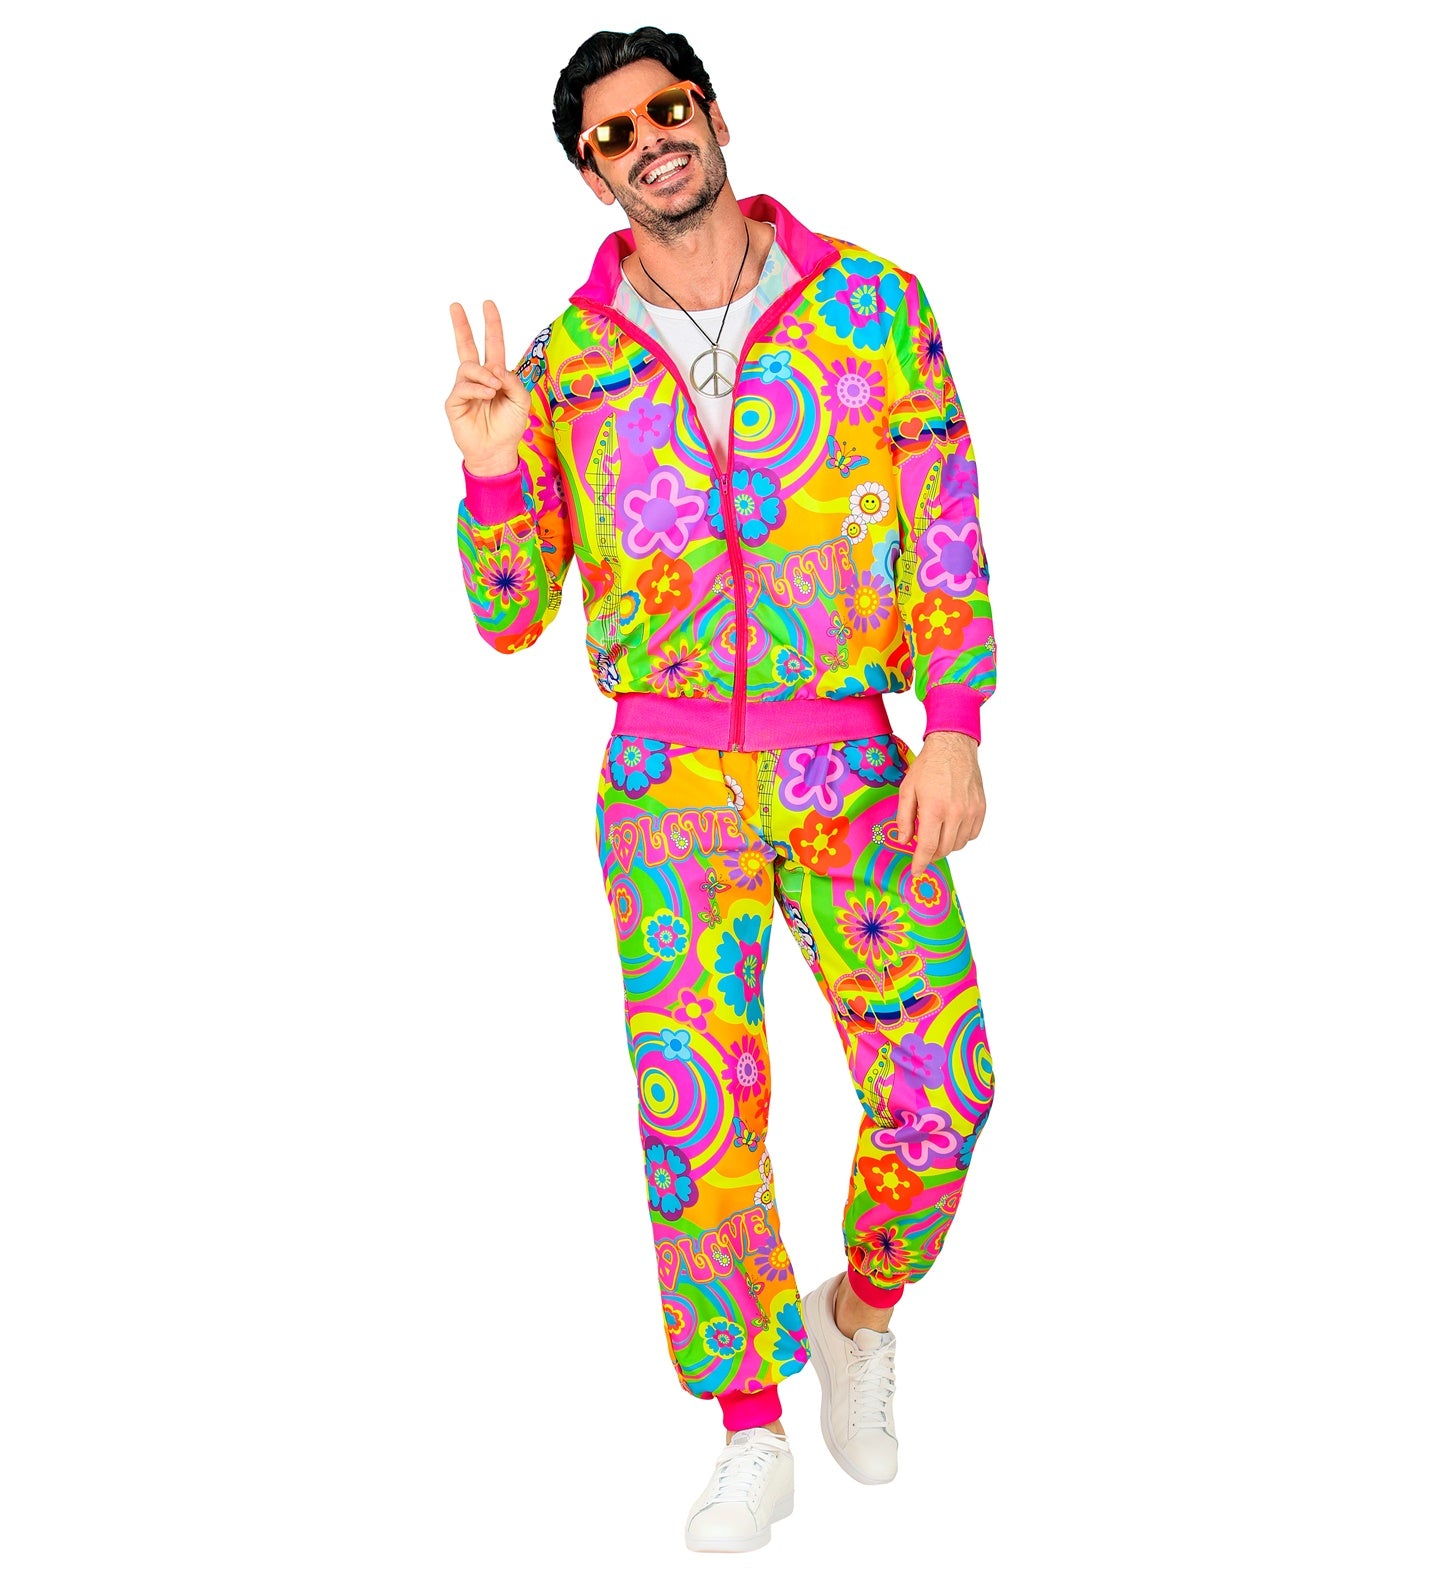 Groovy Love Hippie Tracksuit Costume for men